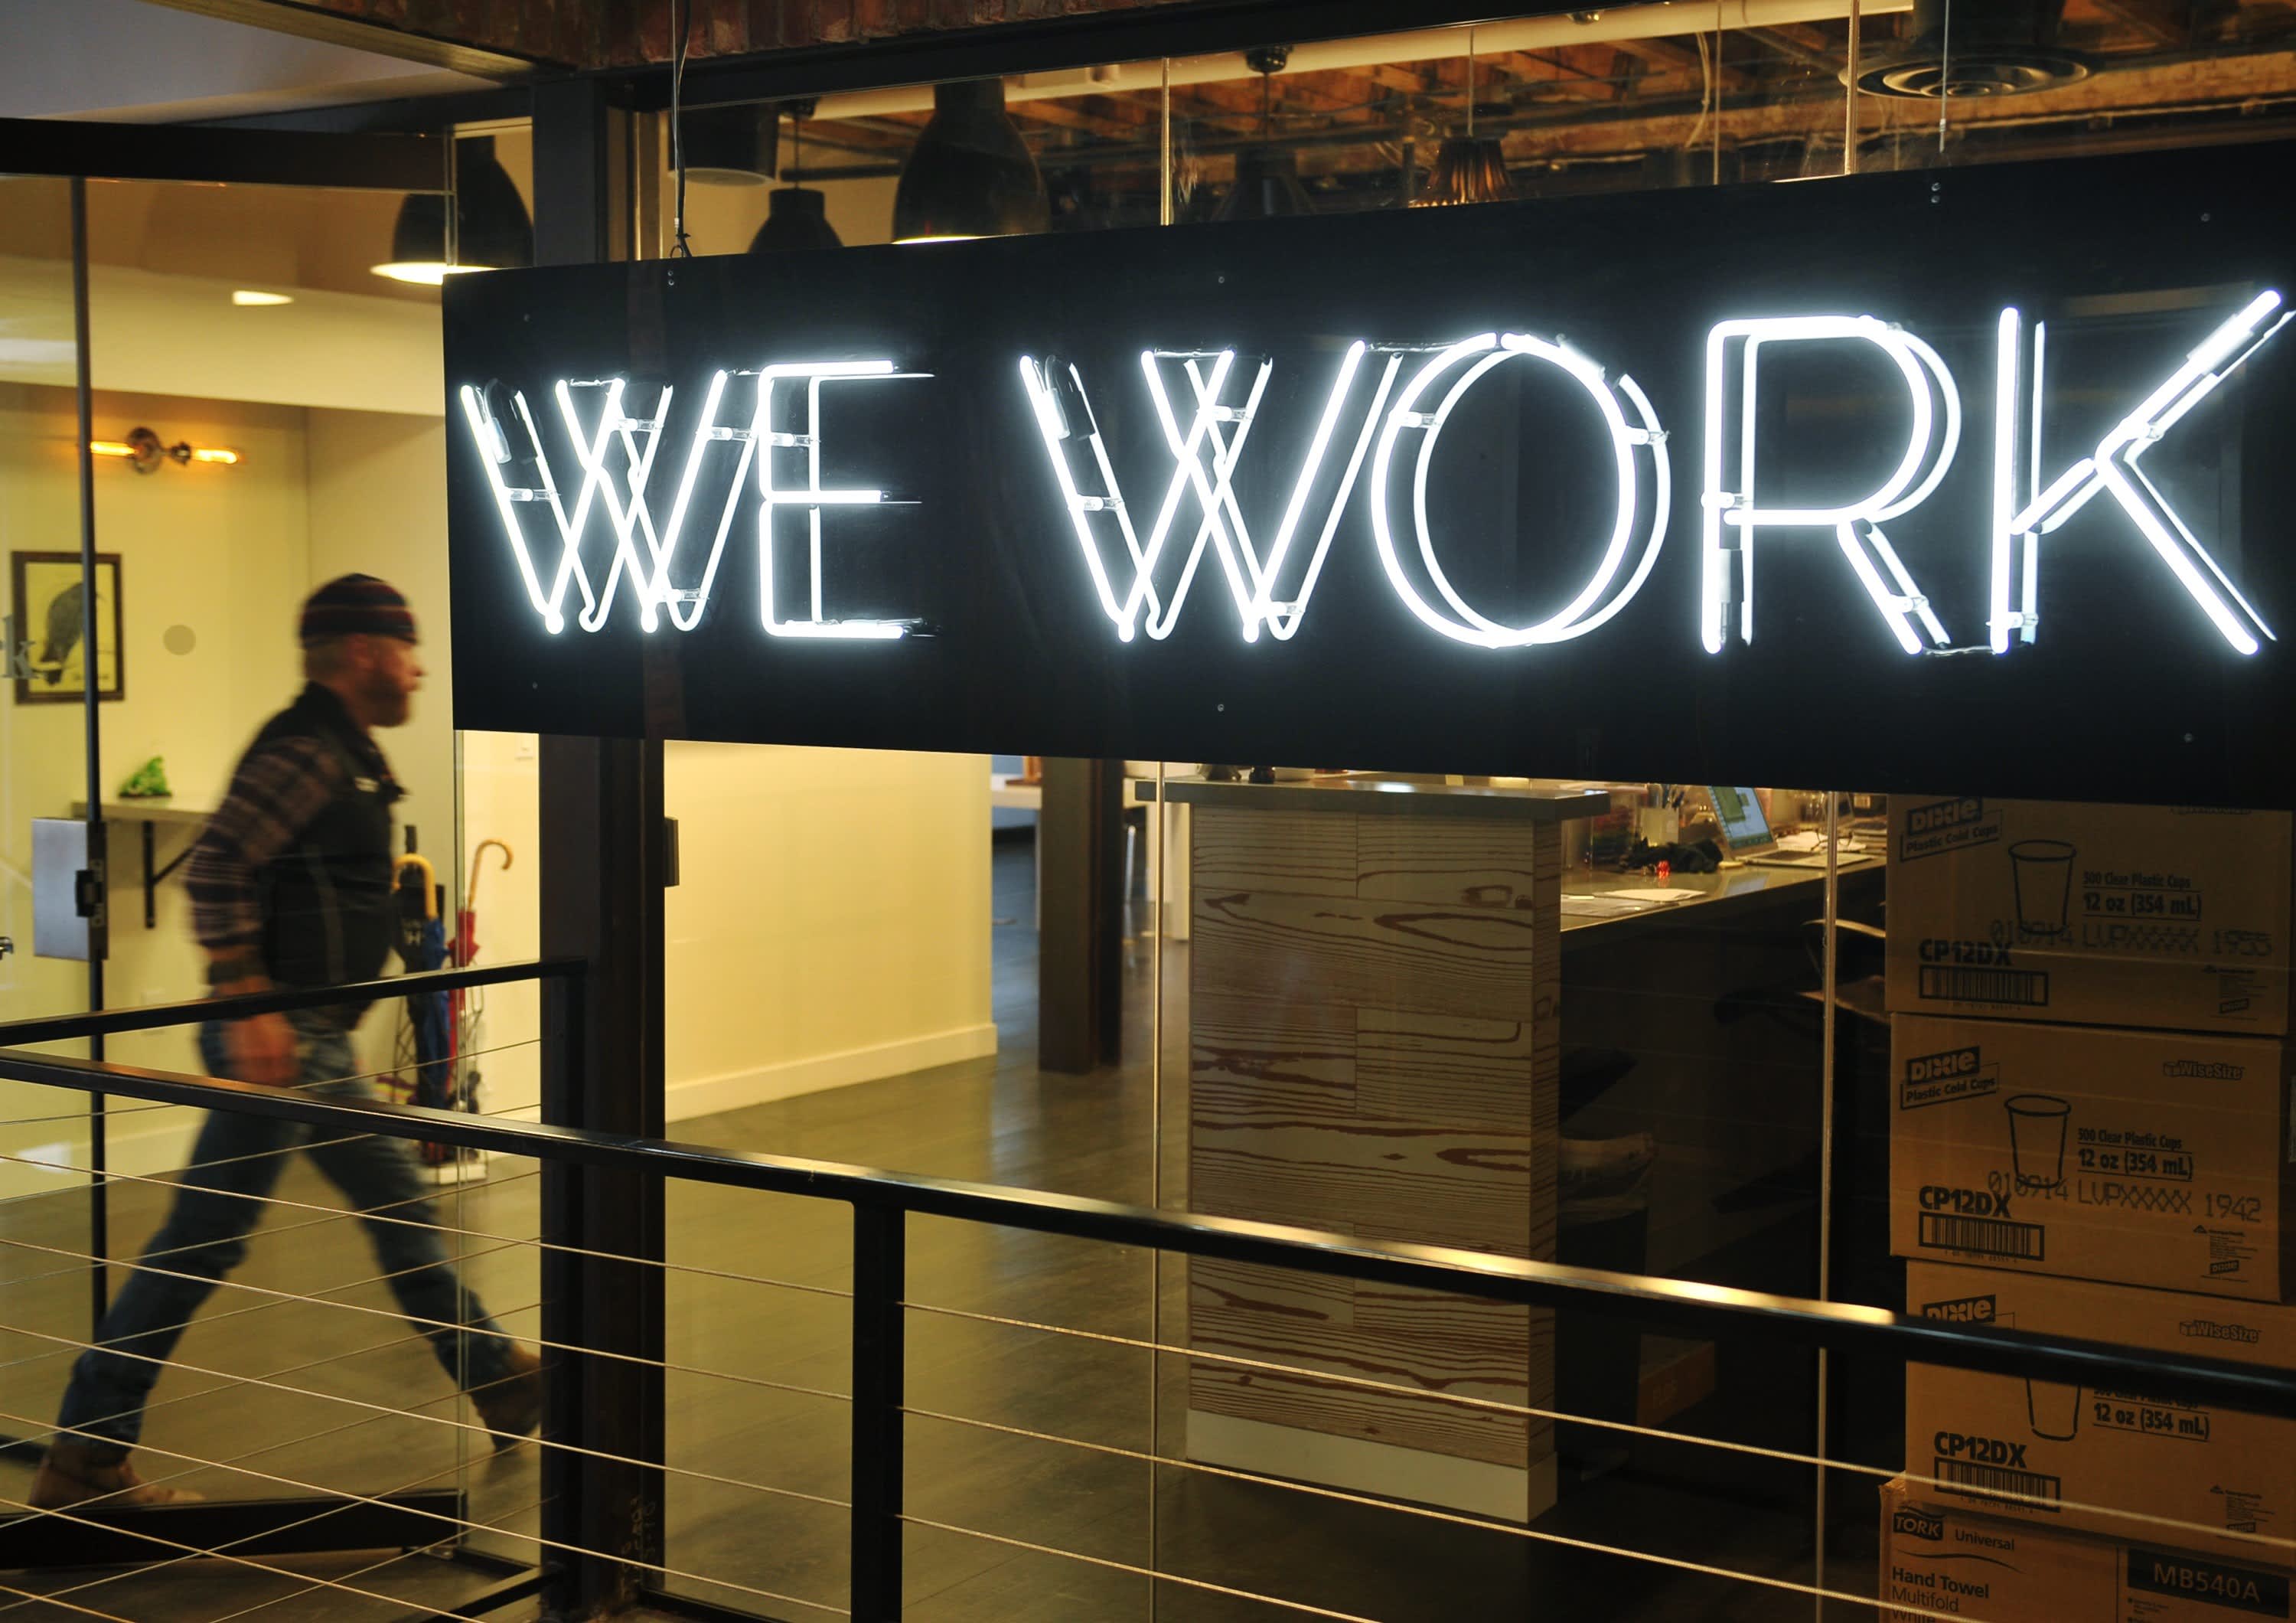 WeWork CEO expects strong rebound for shared office space in post-Covid return to work